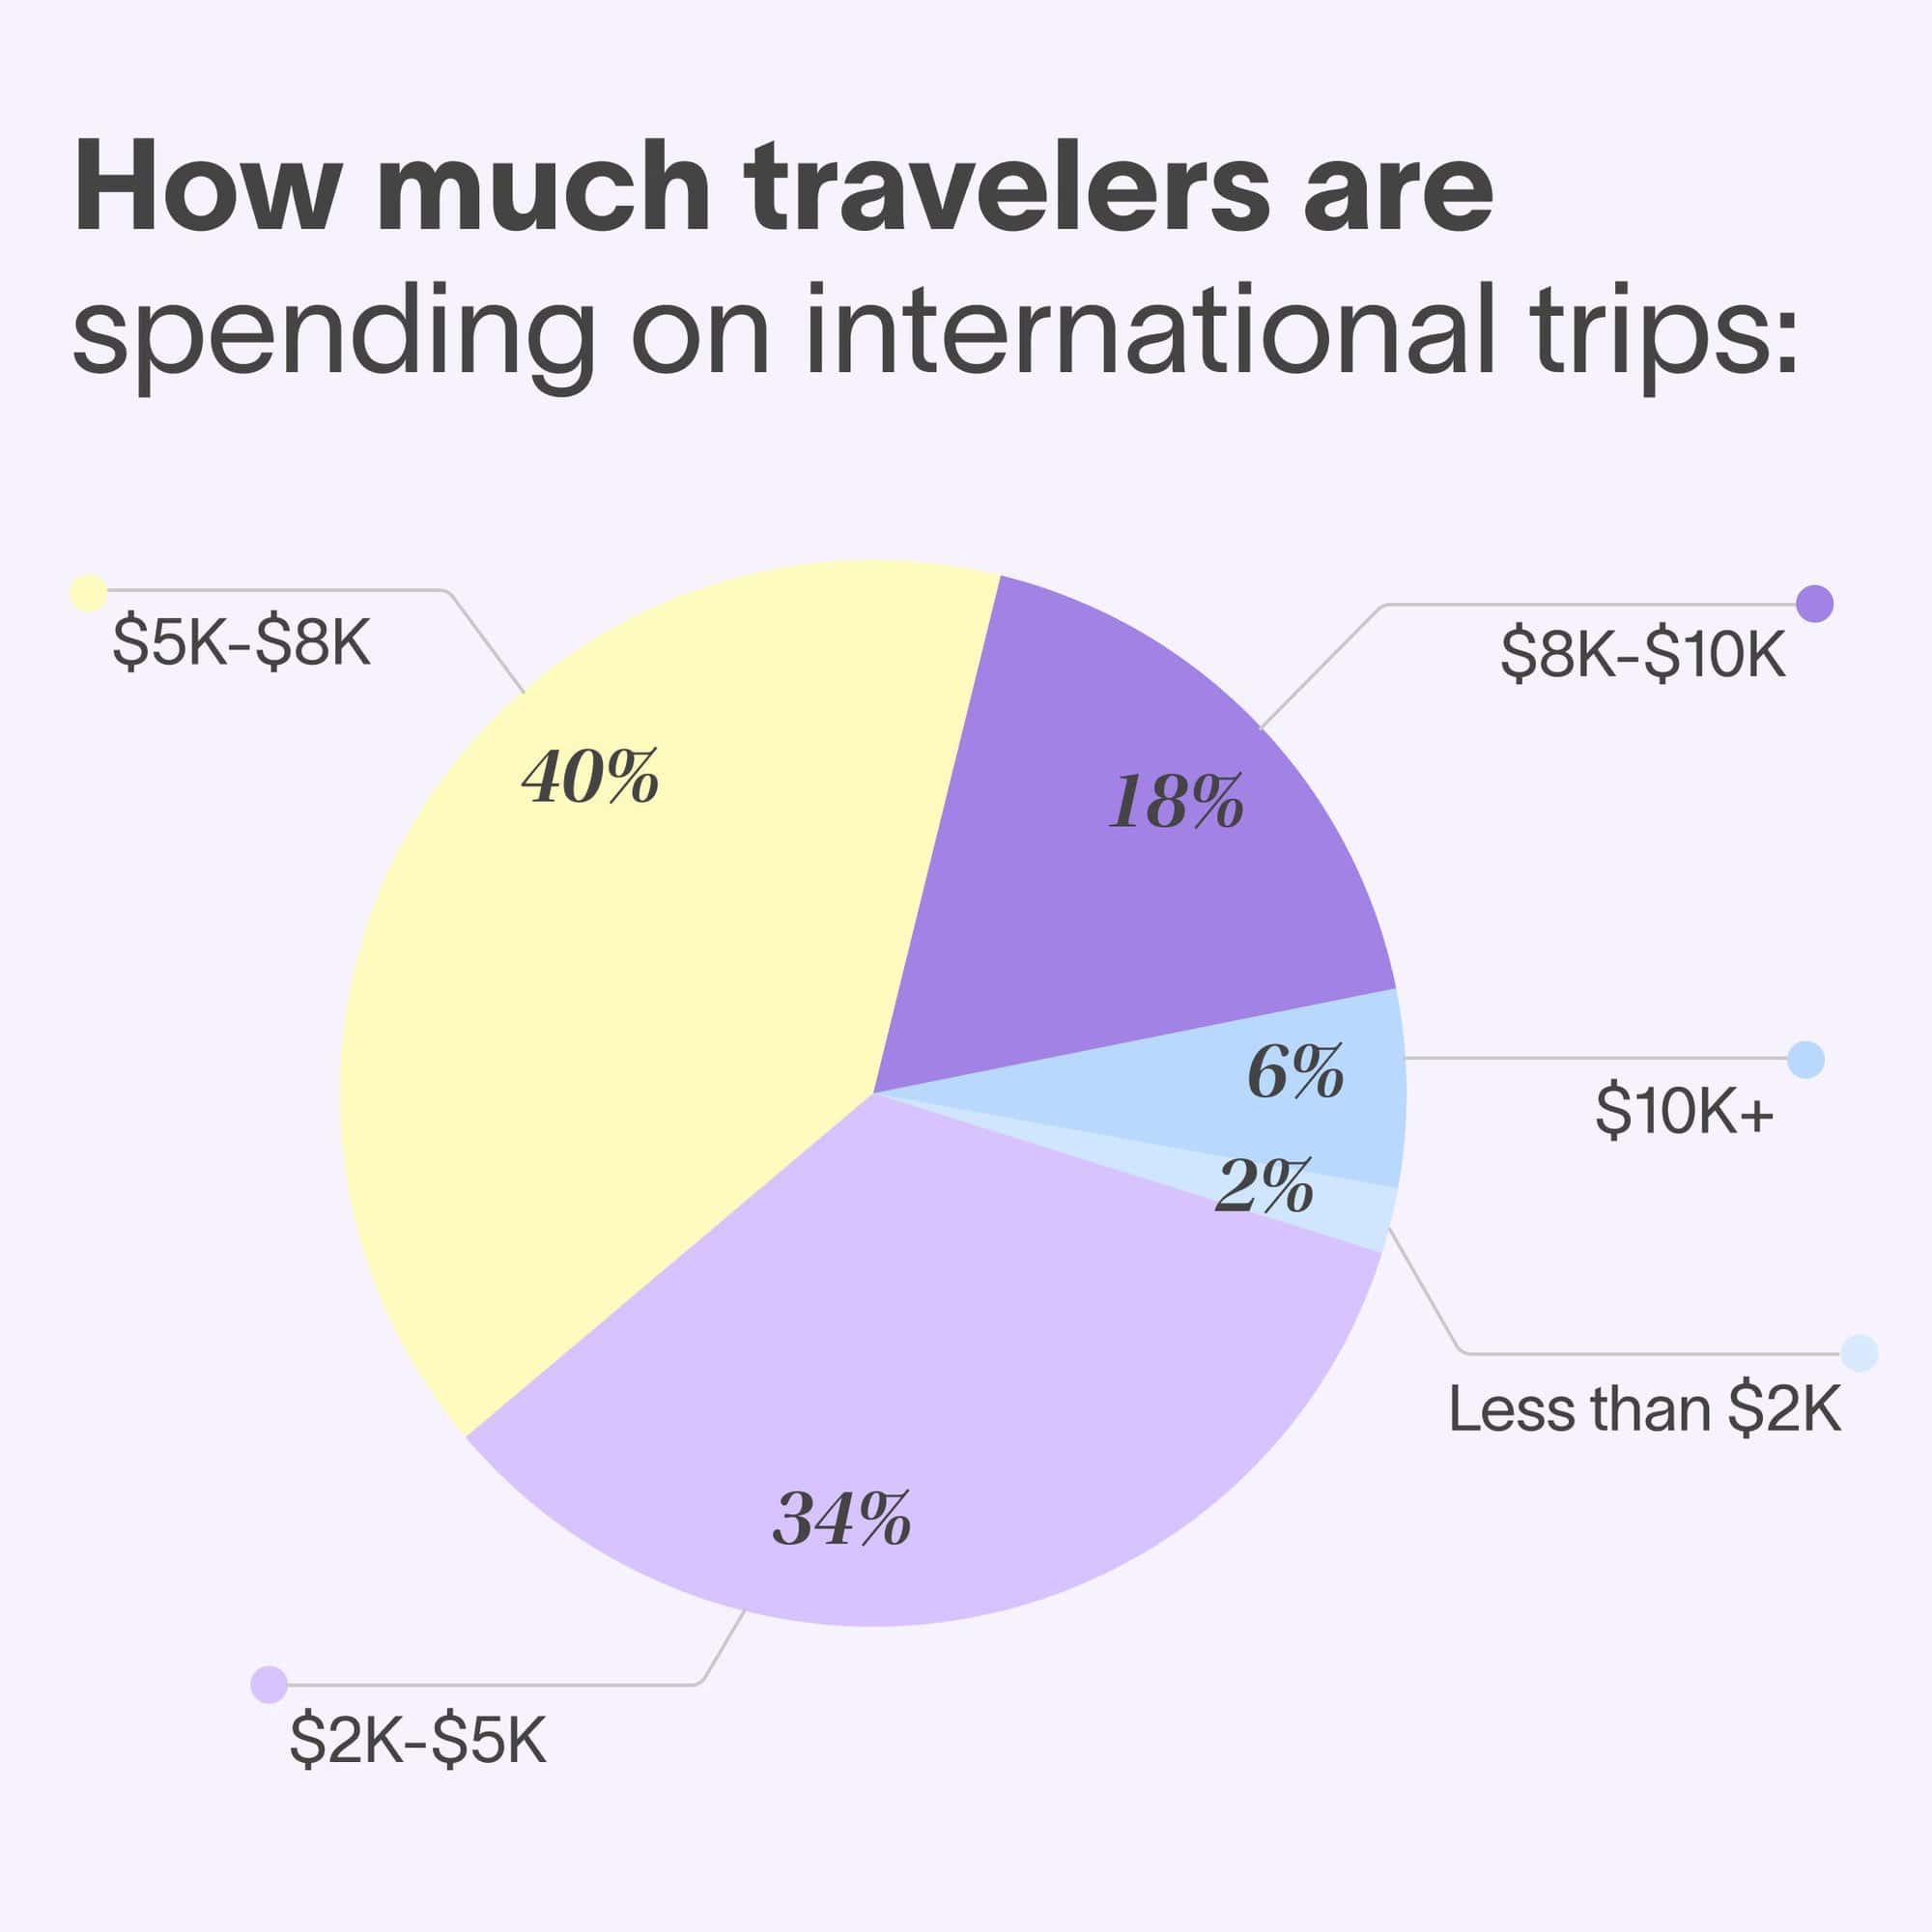 How much travelers are spending on international trips pie graph